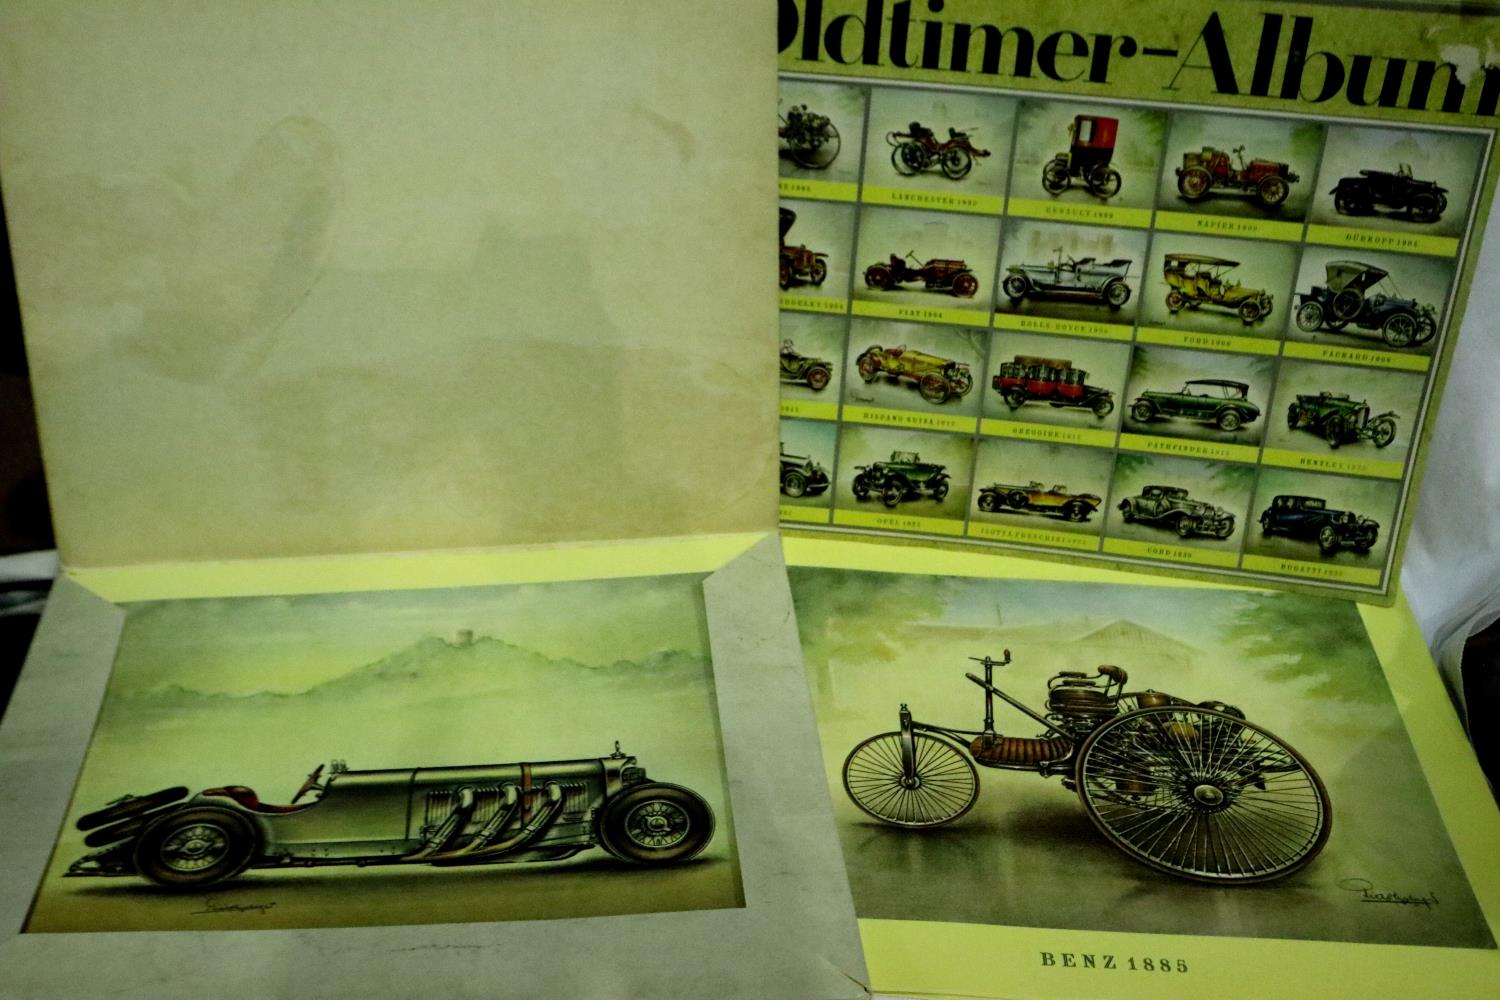 Aral old timer albums No1 & 2 with posters of motor cars 1885 - 1939. P&P Group 1 (£14+VAT for the